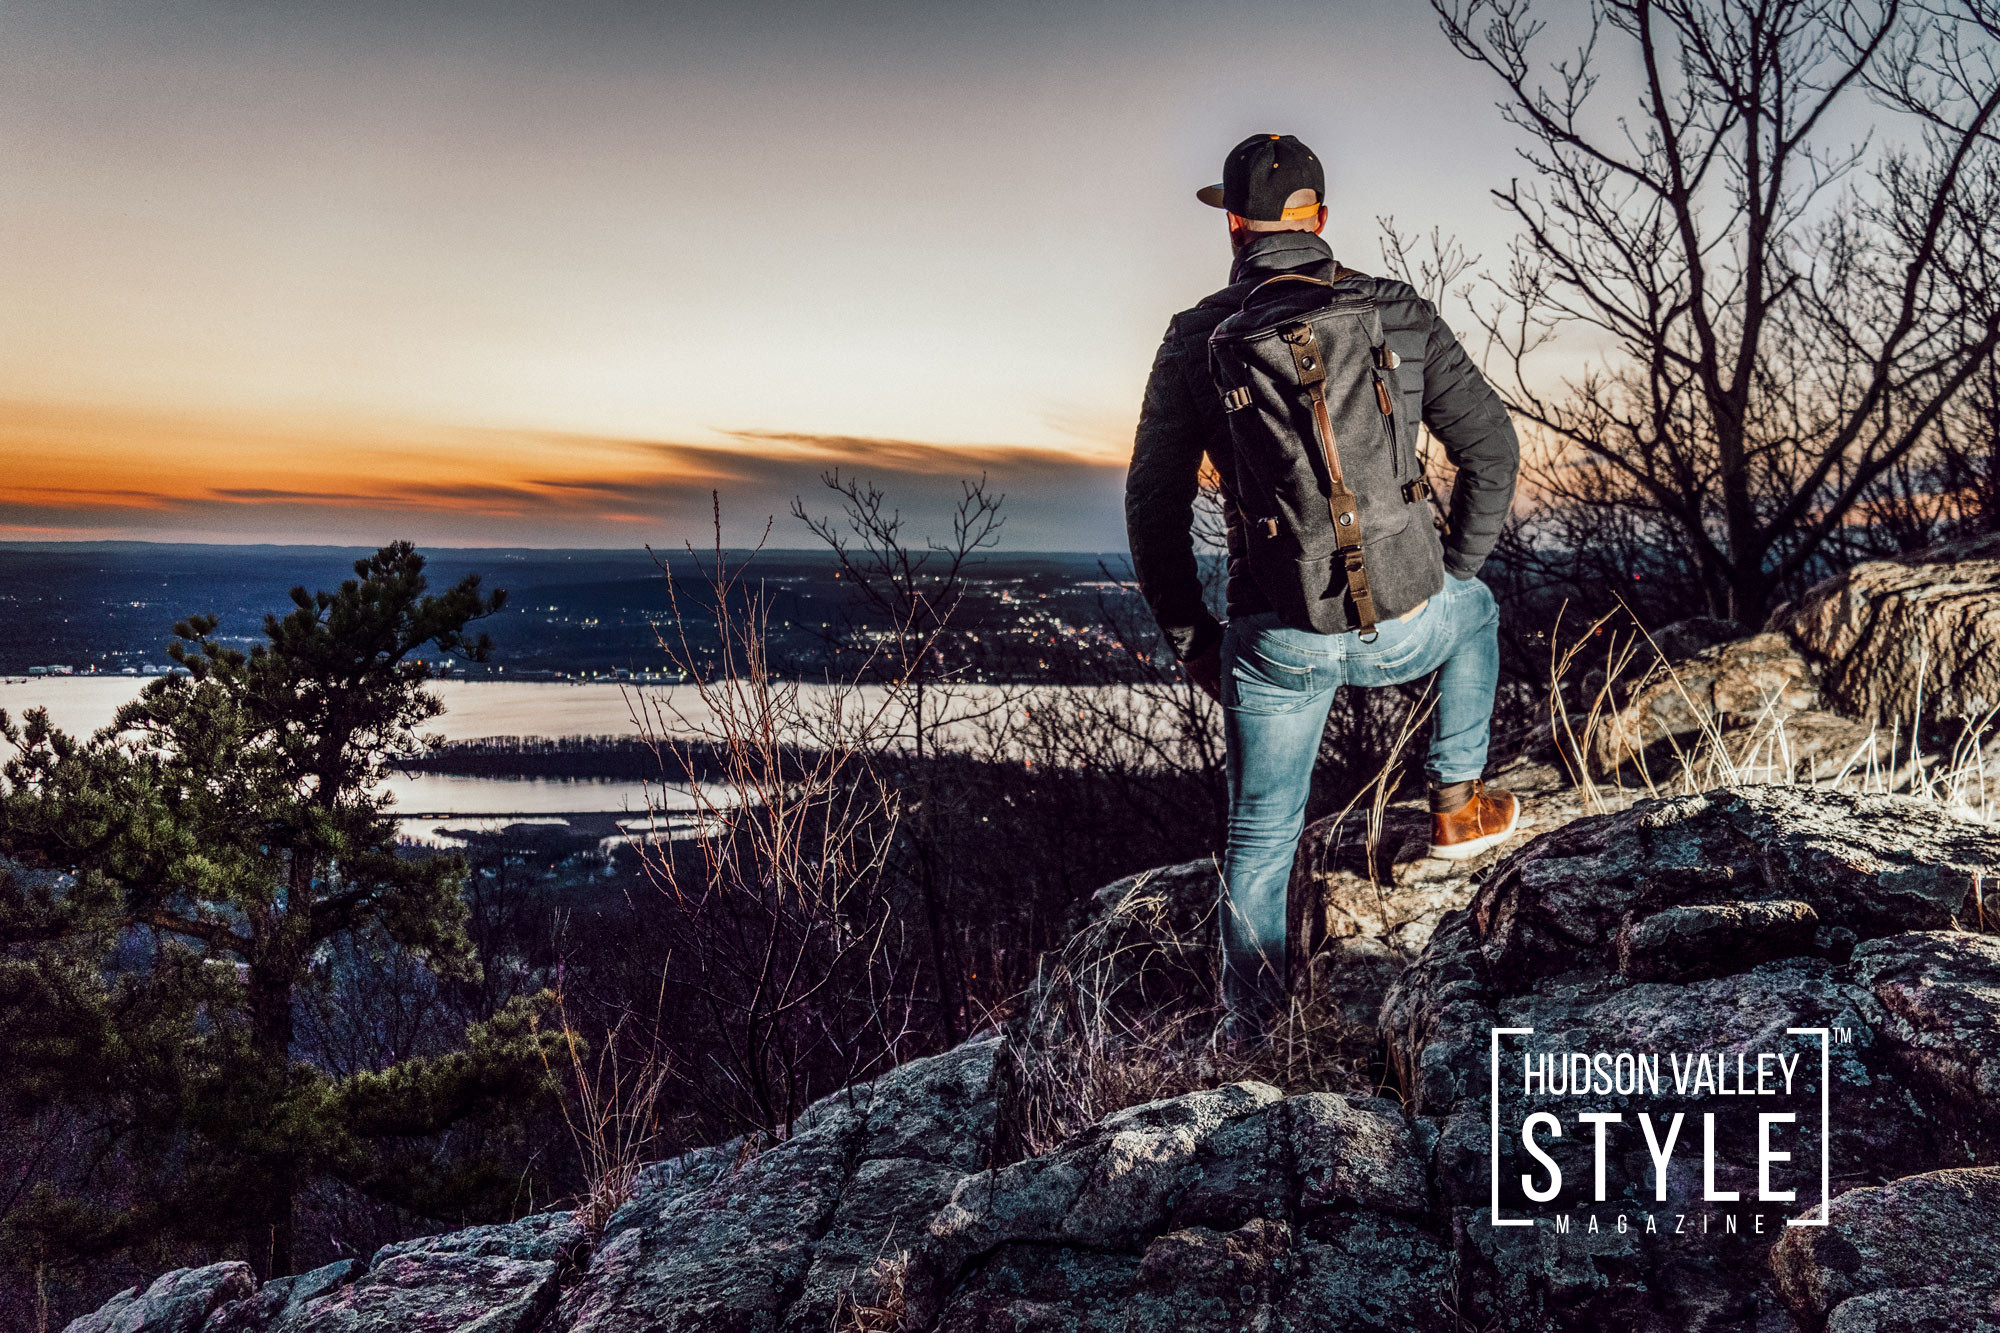 Hiking to the Summit of Mt. Beacon for Breathtaking Hudson River Views – Exploring Hudson Valley with Photographer Maxwell Alexander